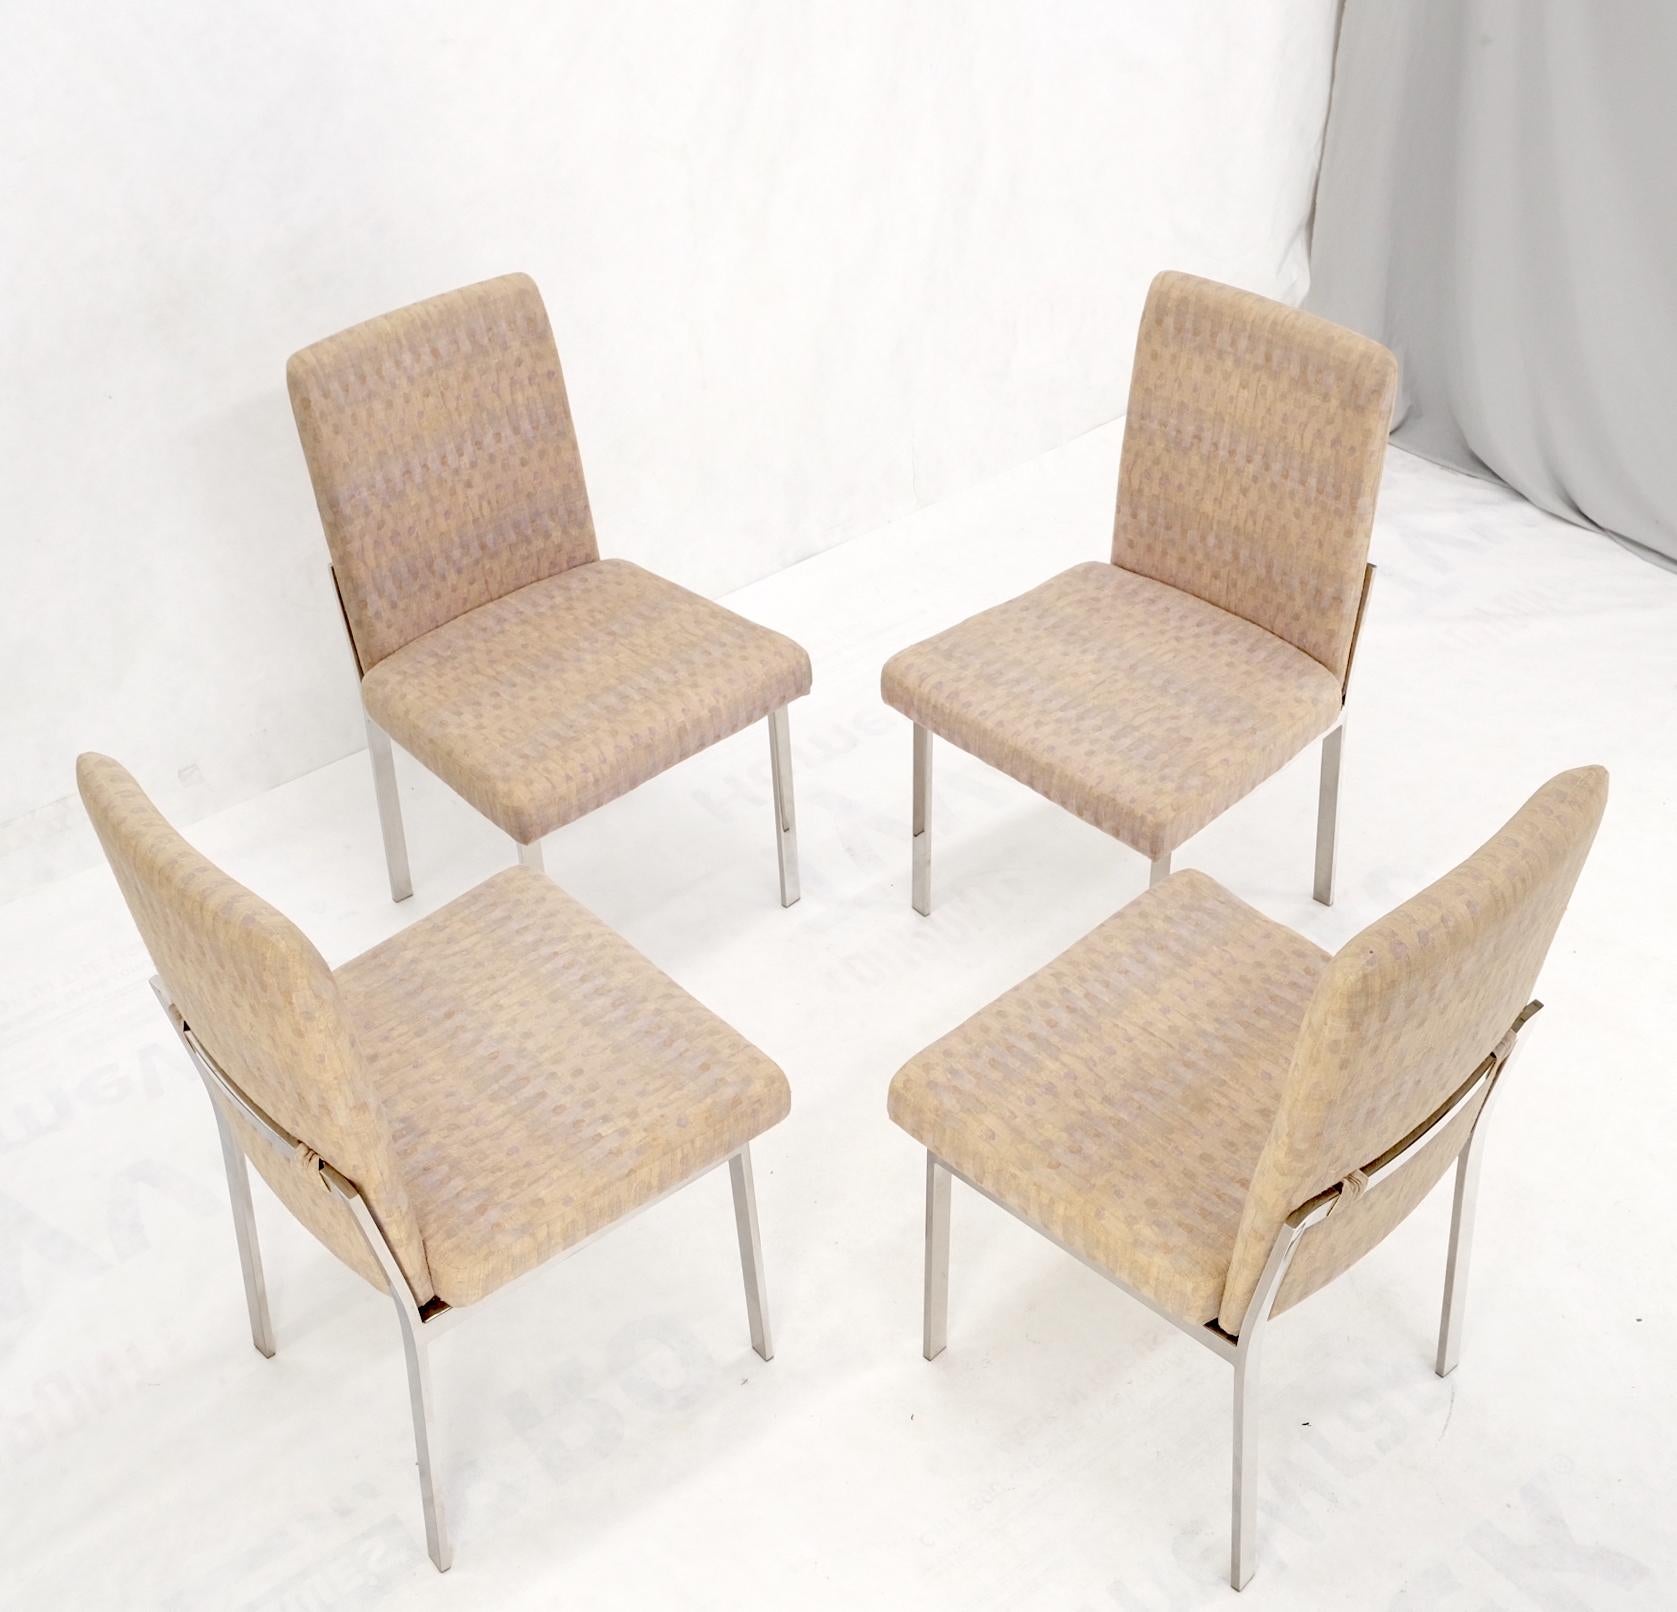 Set of 4 Mid-Century Modern Polished Stainless Steel Upholstered Dining Chairs For Sale 4